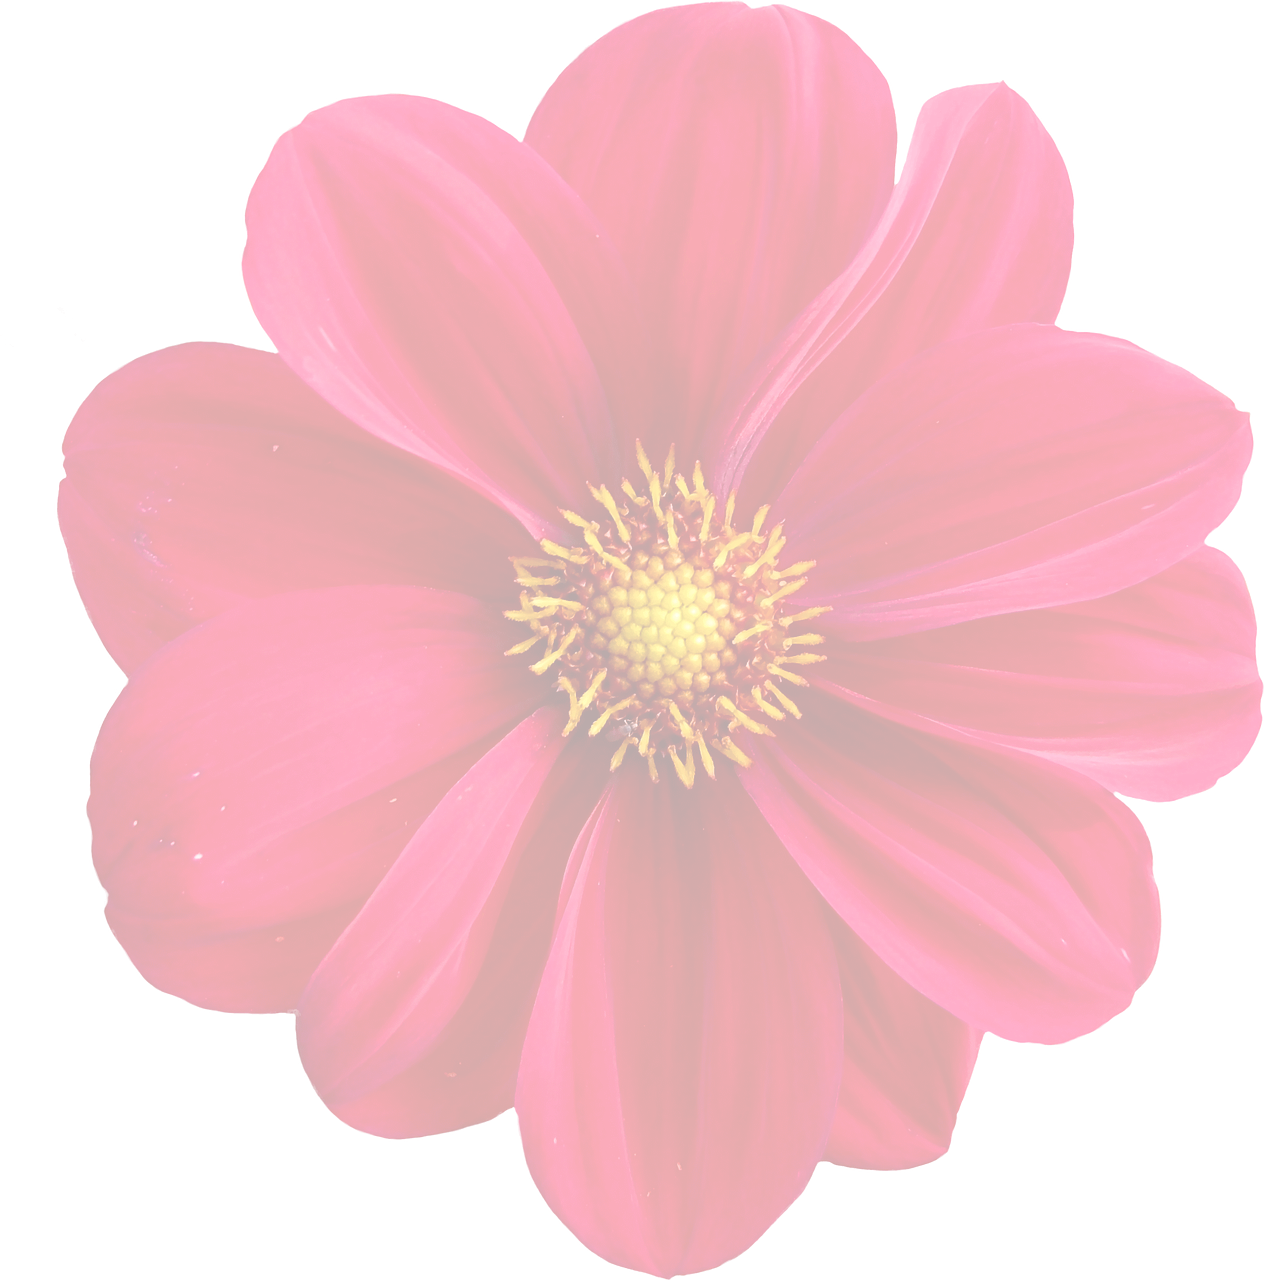 Download A Close Up Of A Flower 100 Free Fastpng 